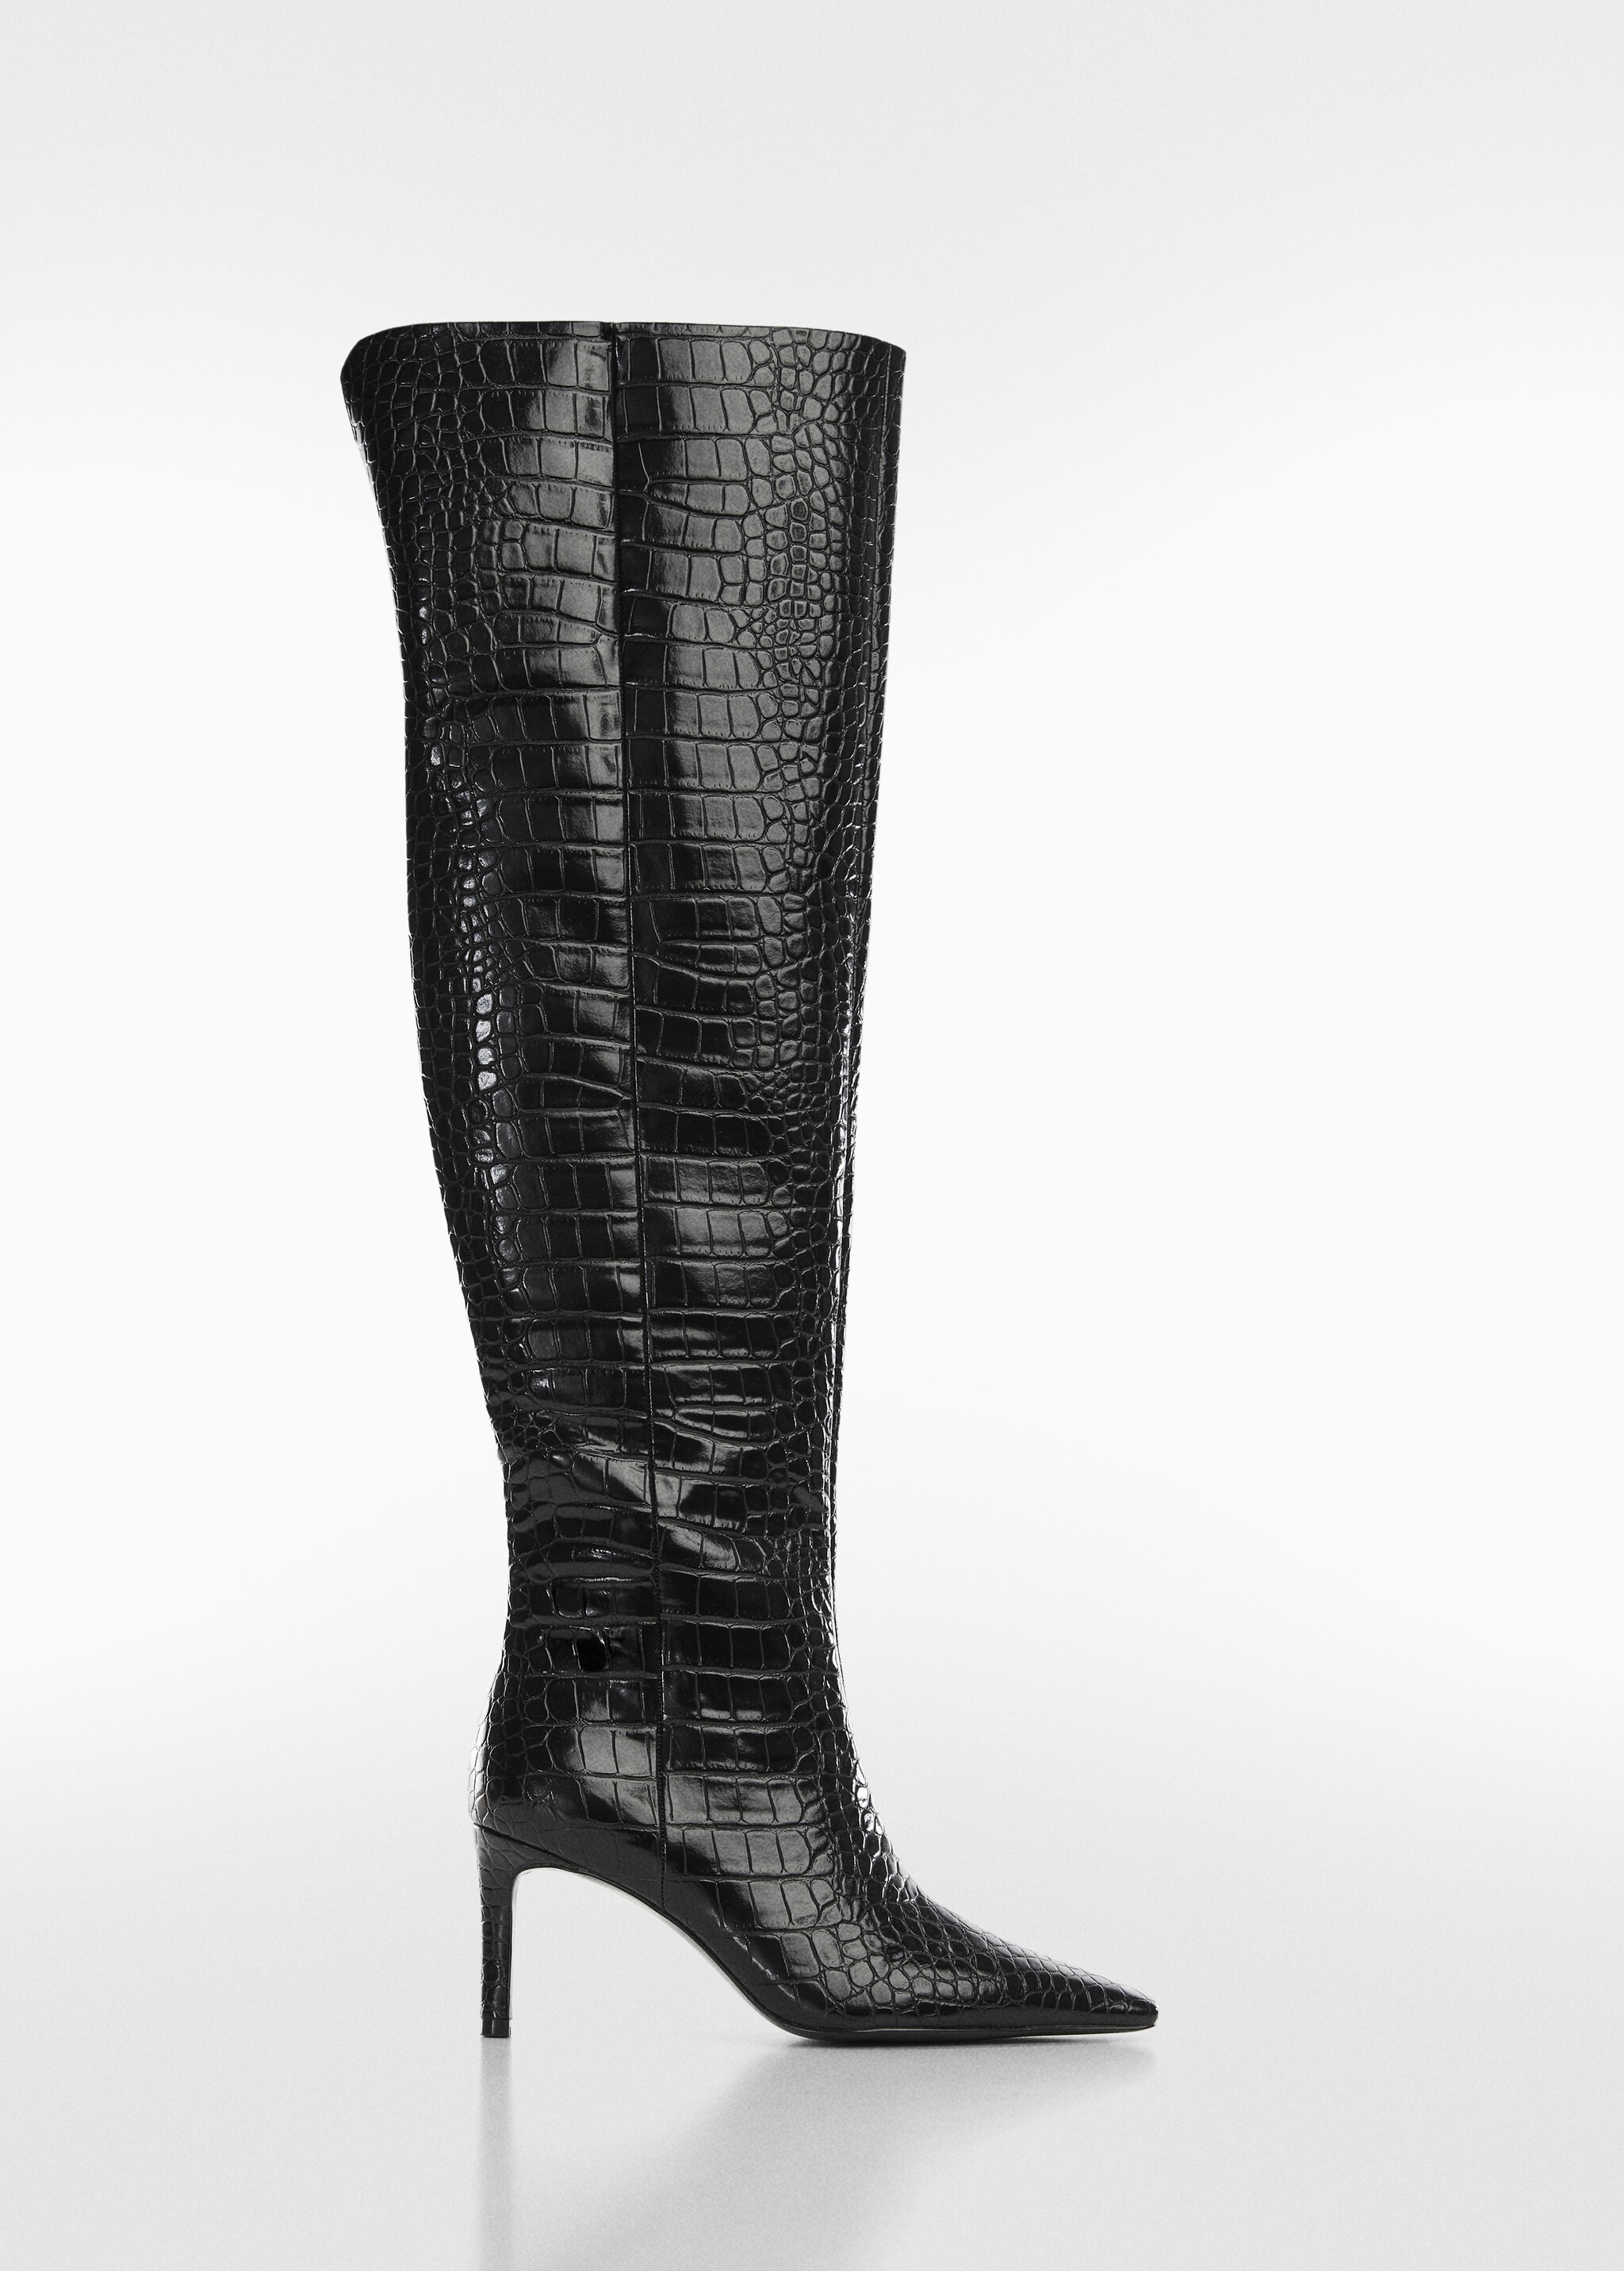 Coco-effect heeled boots - Article without model